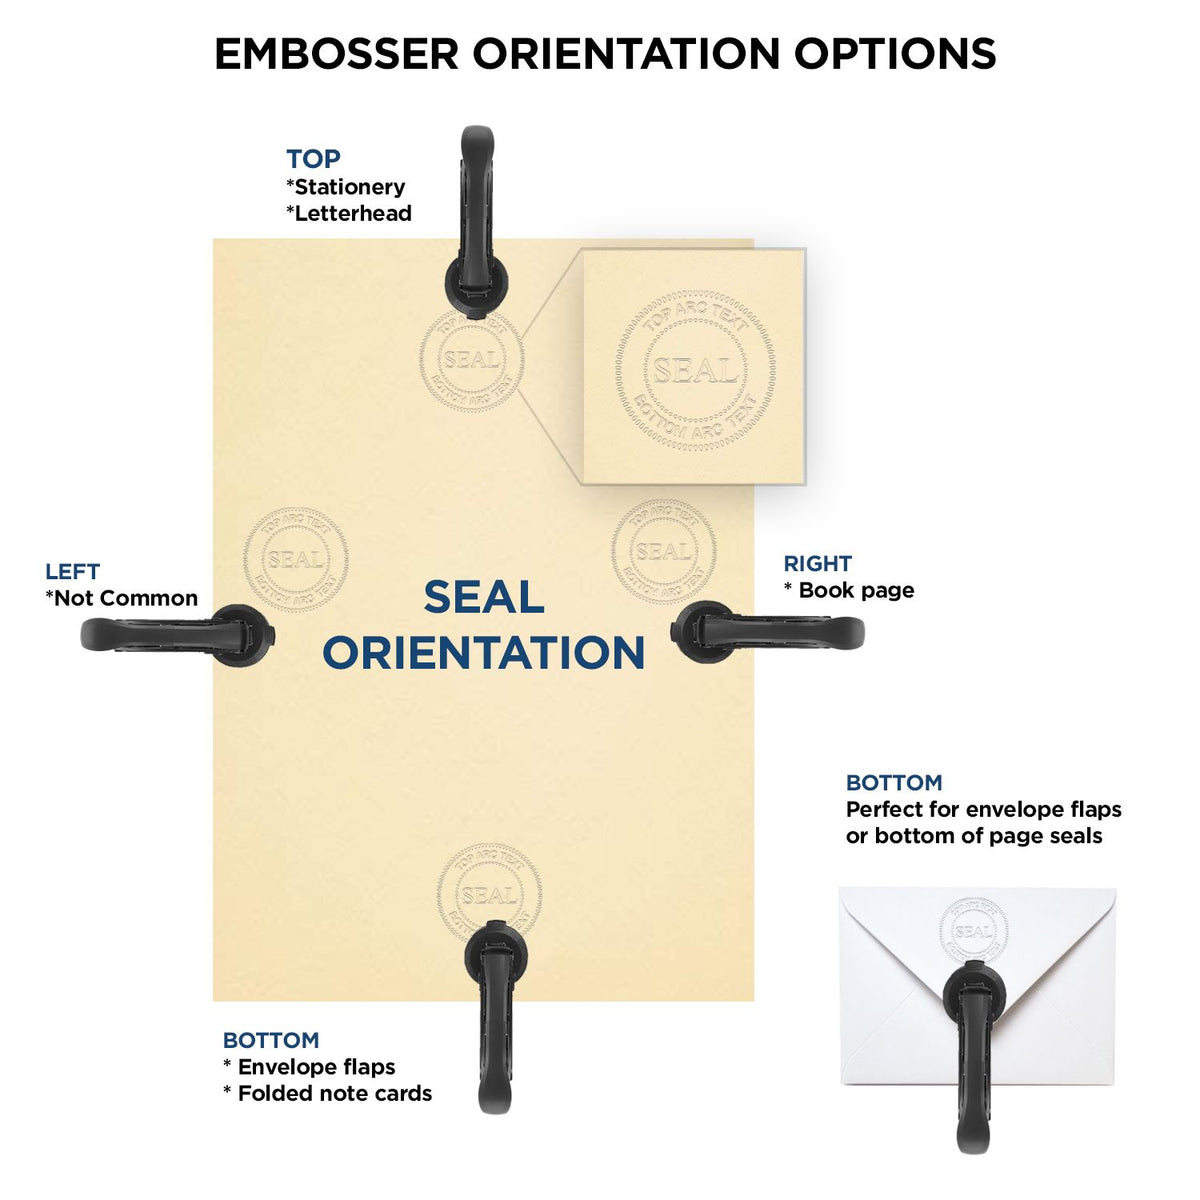 An infographic for the Long Reach Missouri Land Surveyor Seal showing embosser orientation, this is showing examples of a top, bottom, right and left insert.